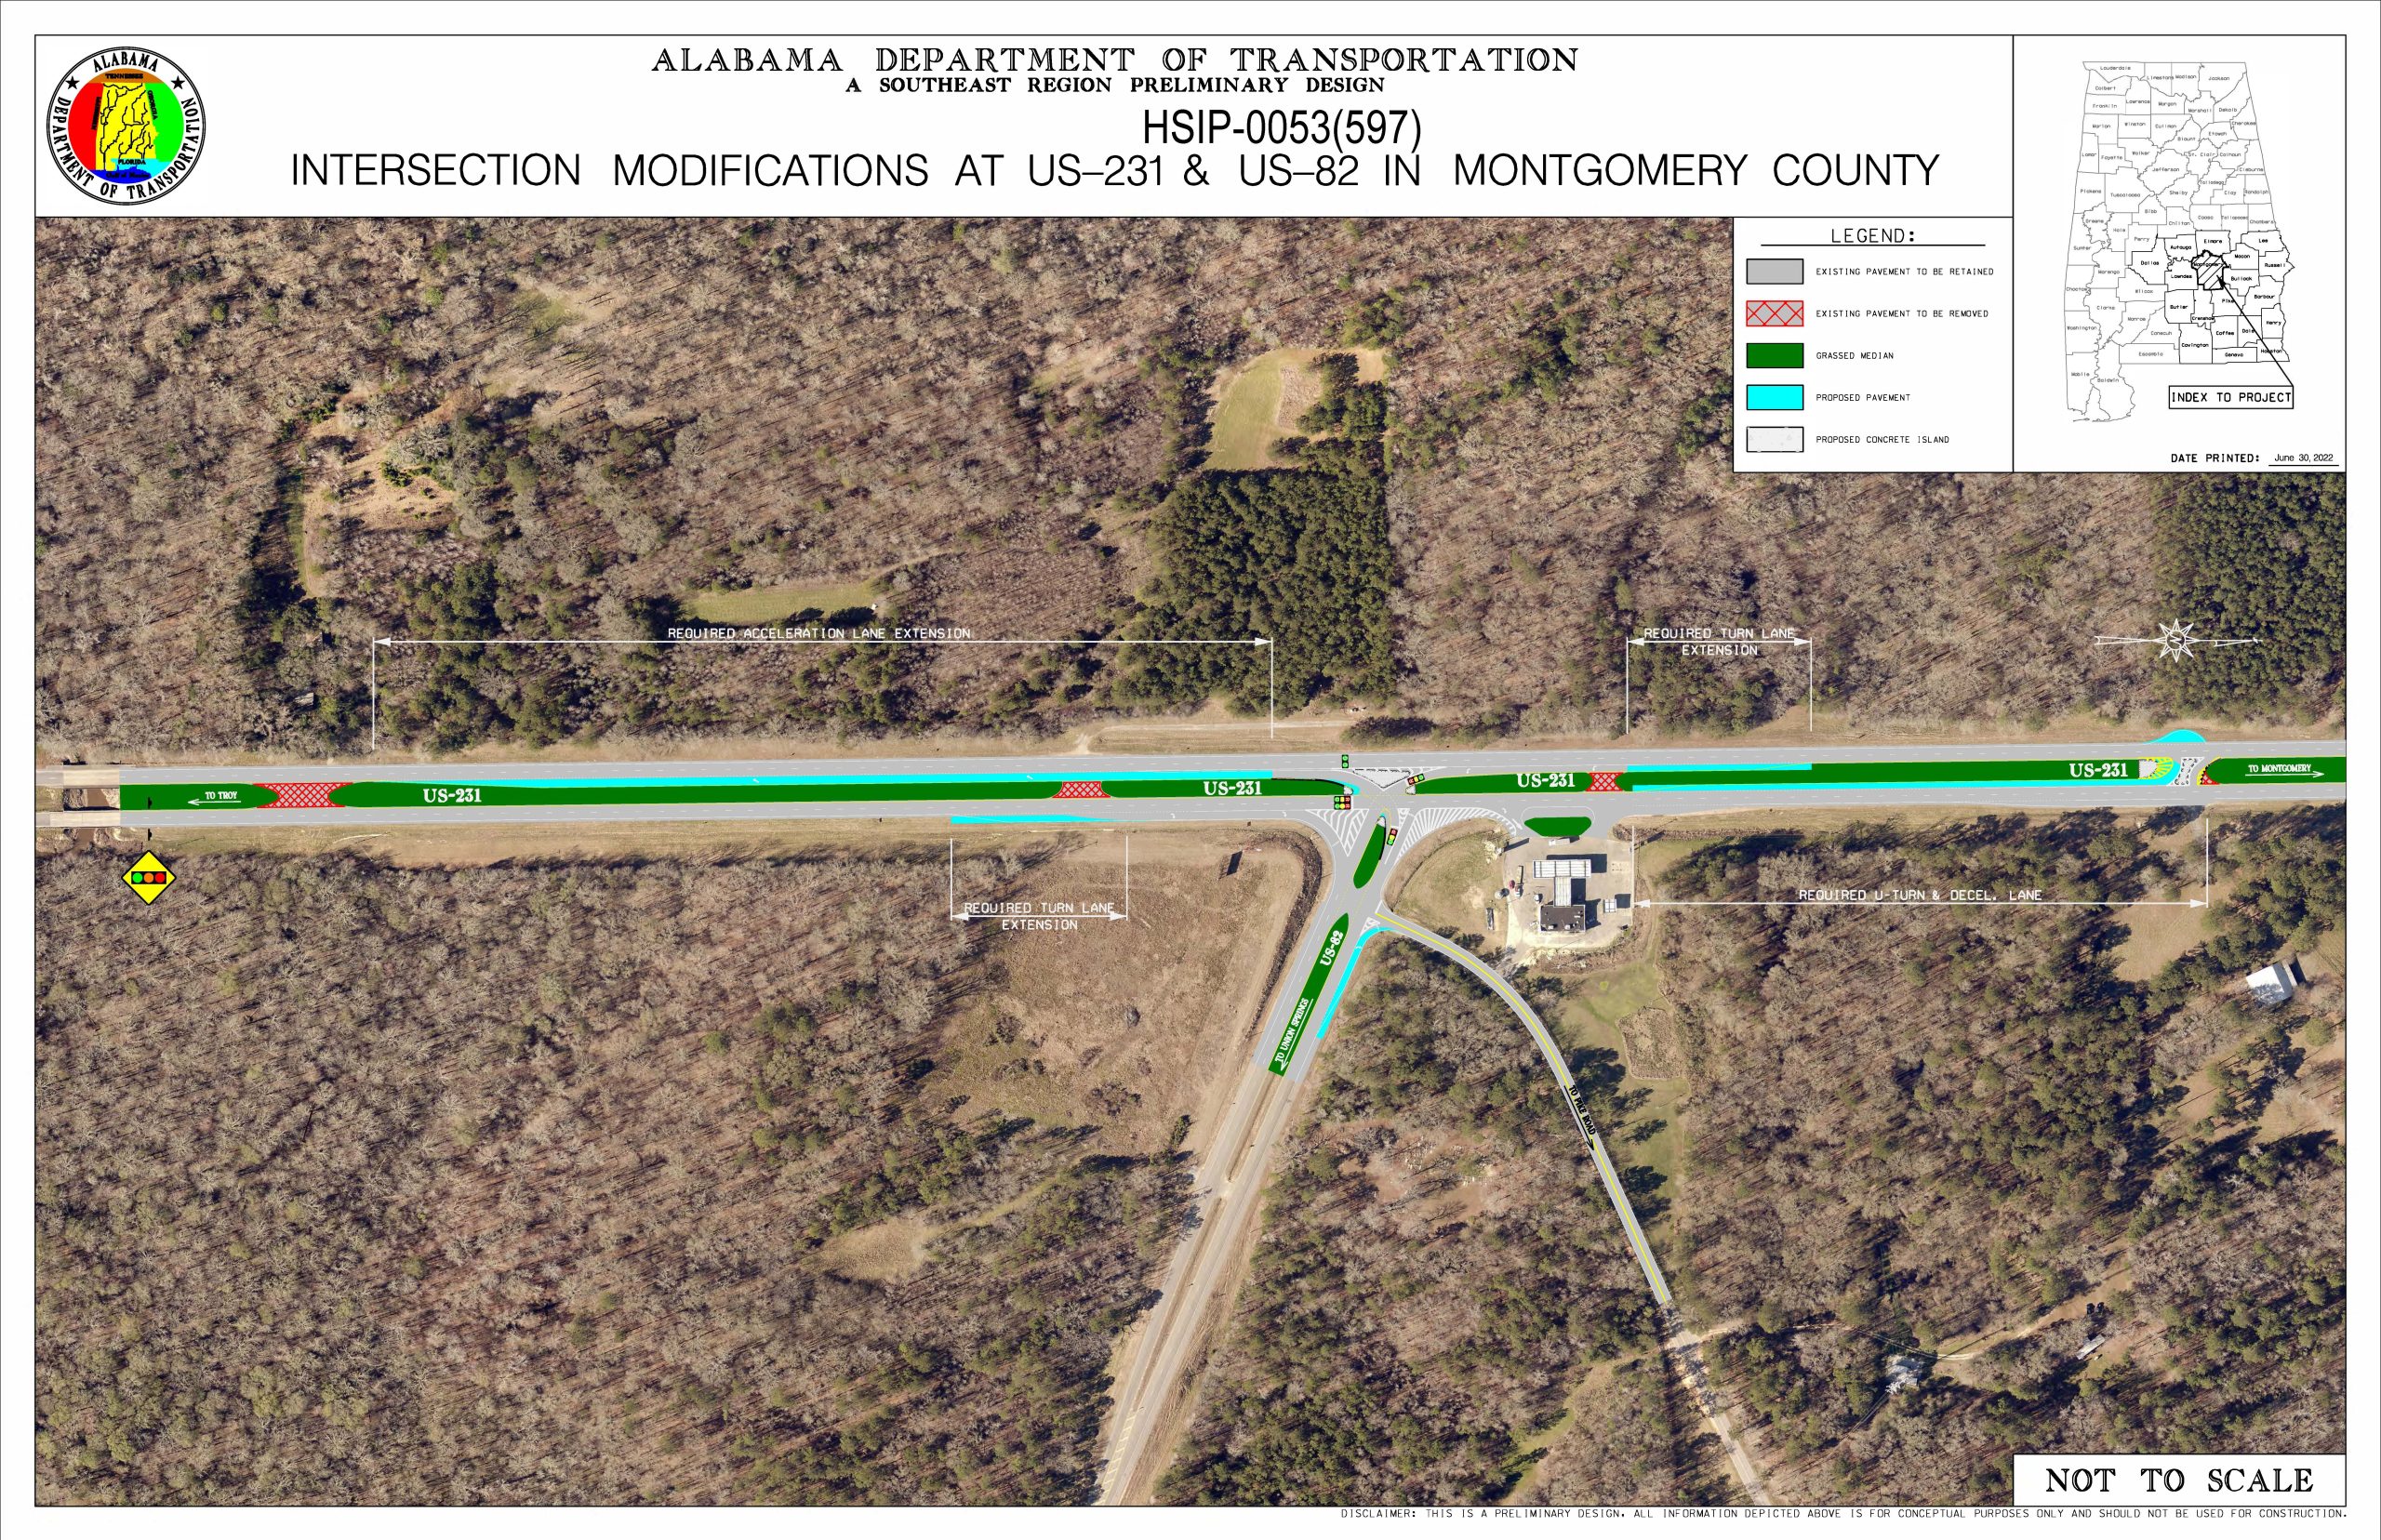 Project overview map of the intersection where US-82 intersects with US-231. The map shows where they will be installing a new continuous "Green T" traffic signal